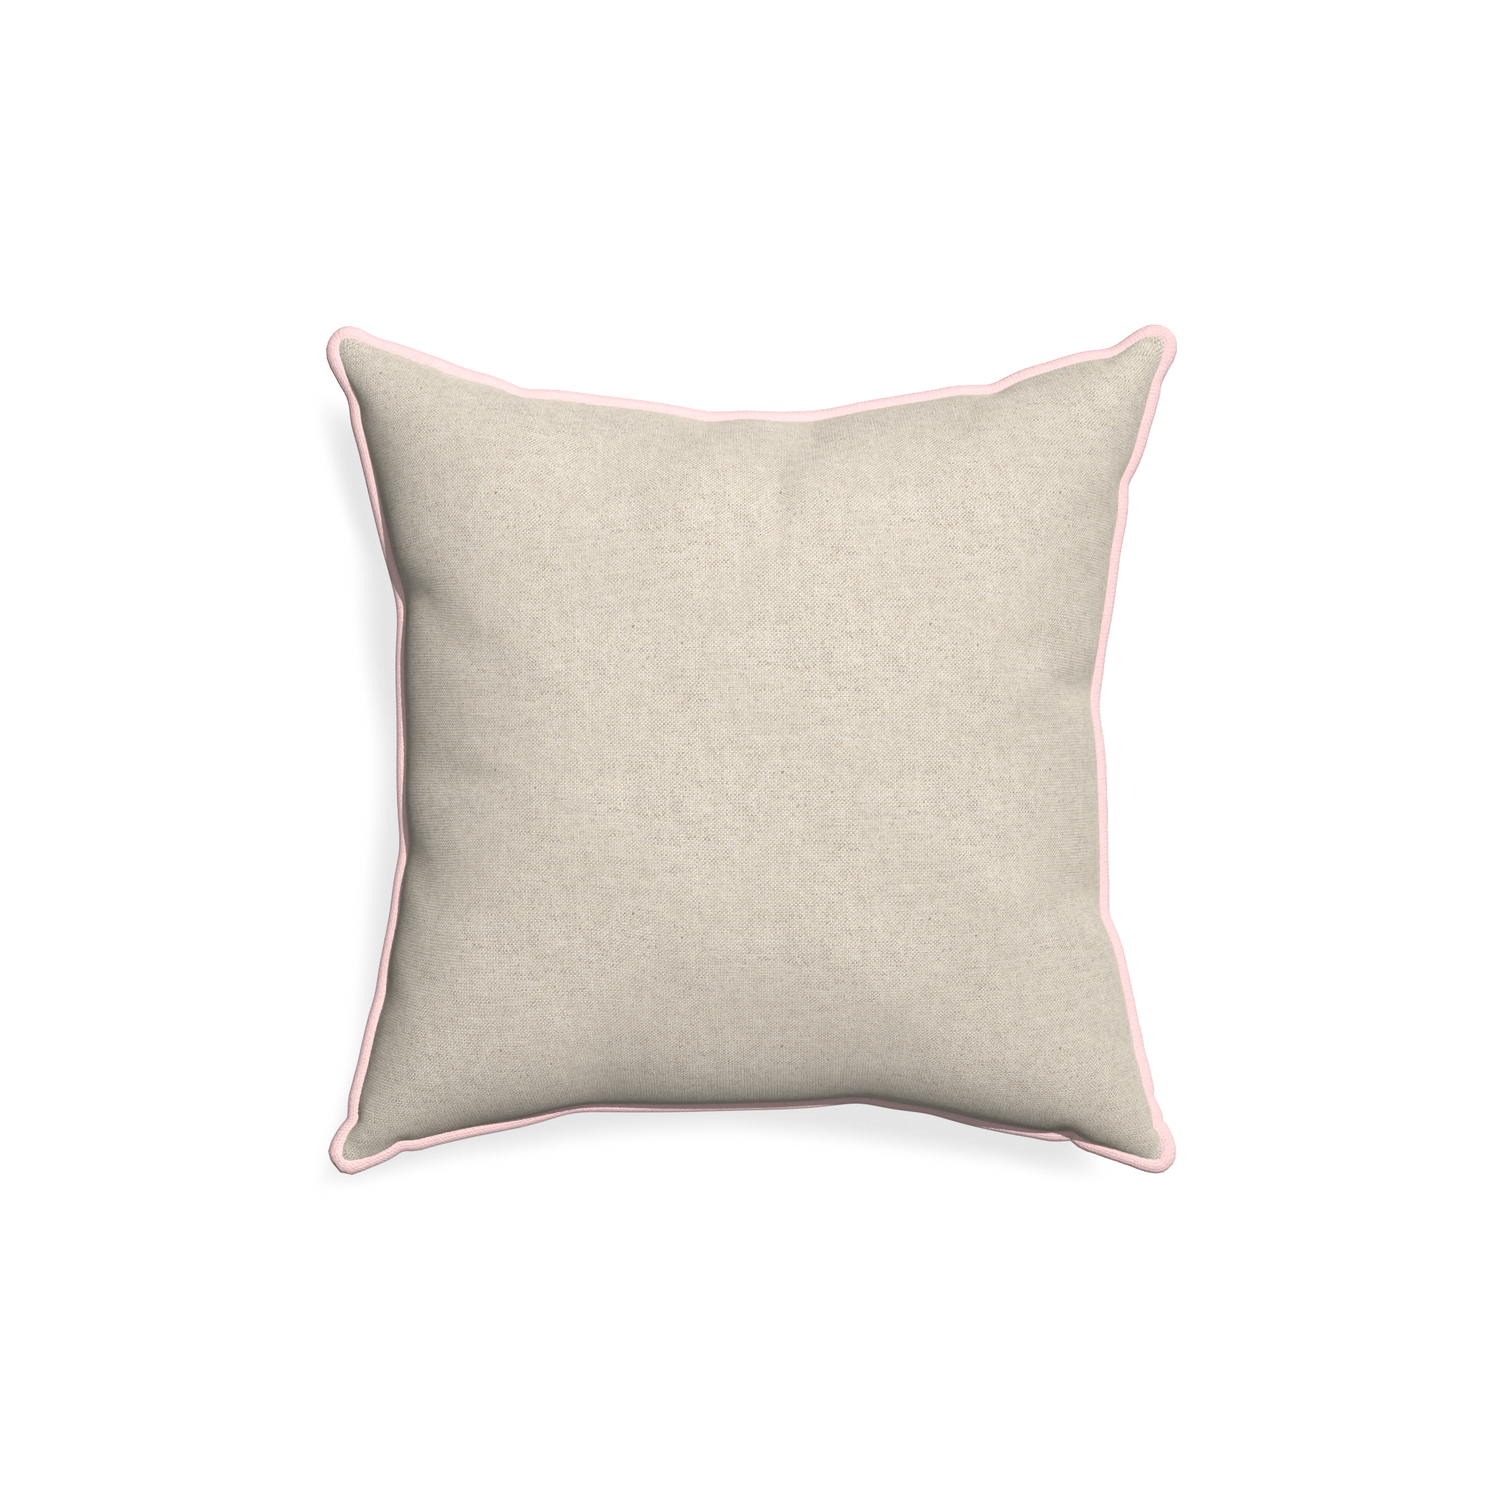 18-square oat custom light brownpillow with petal piping on white background